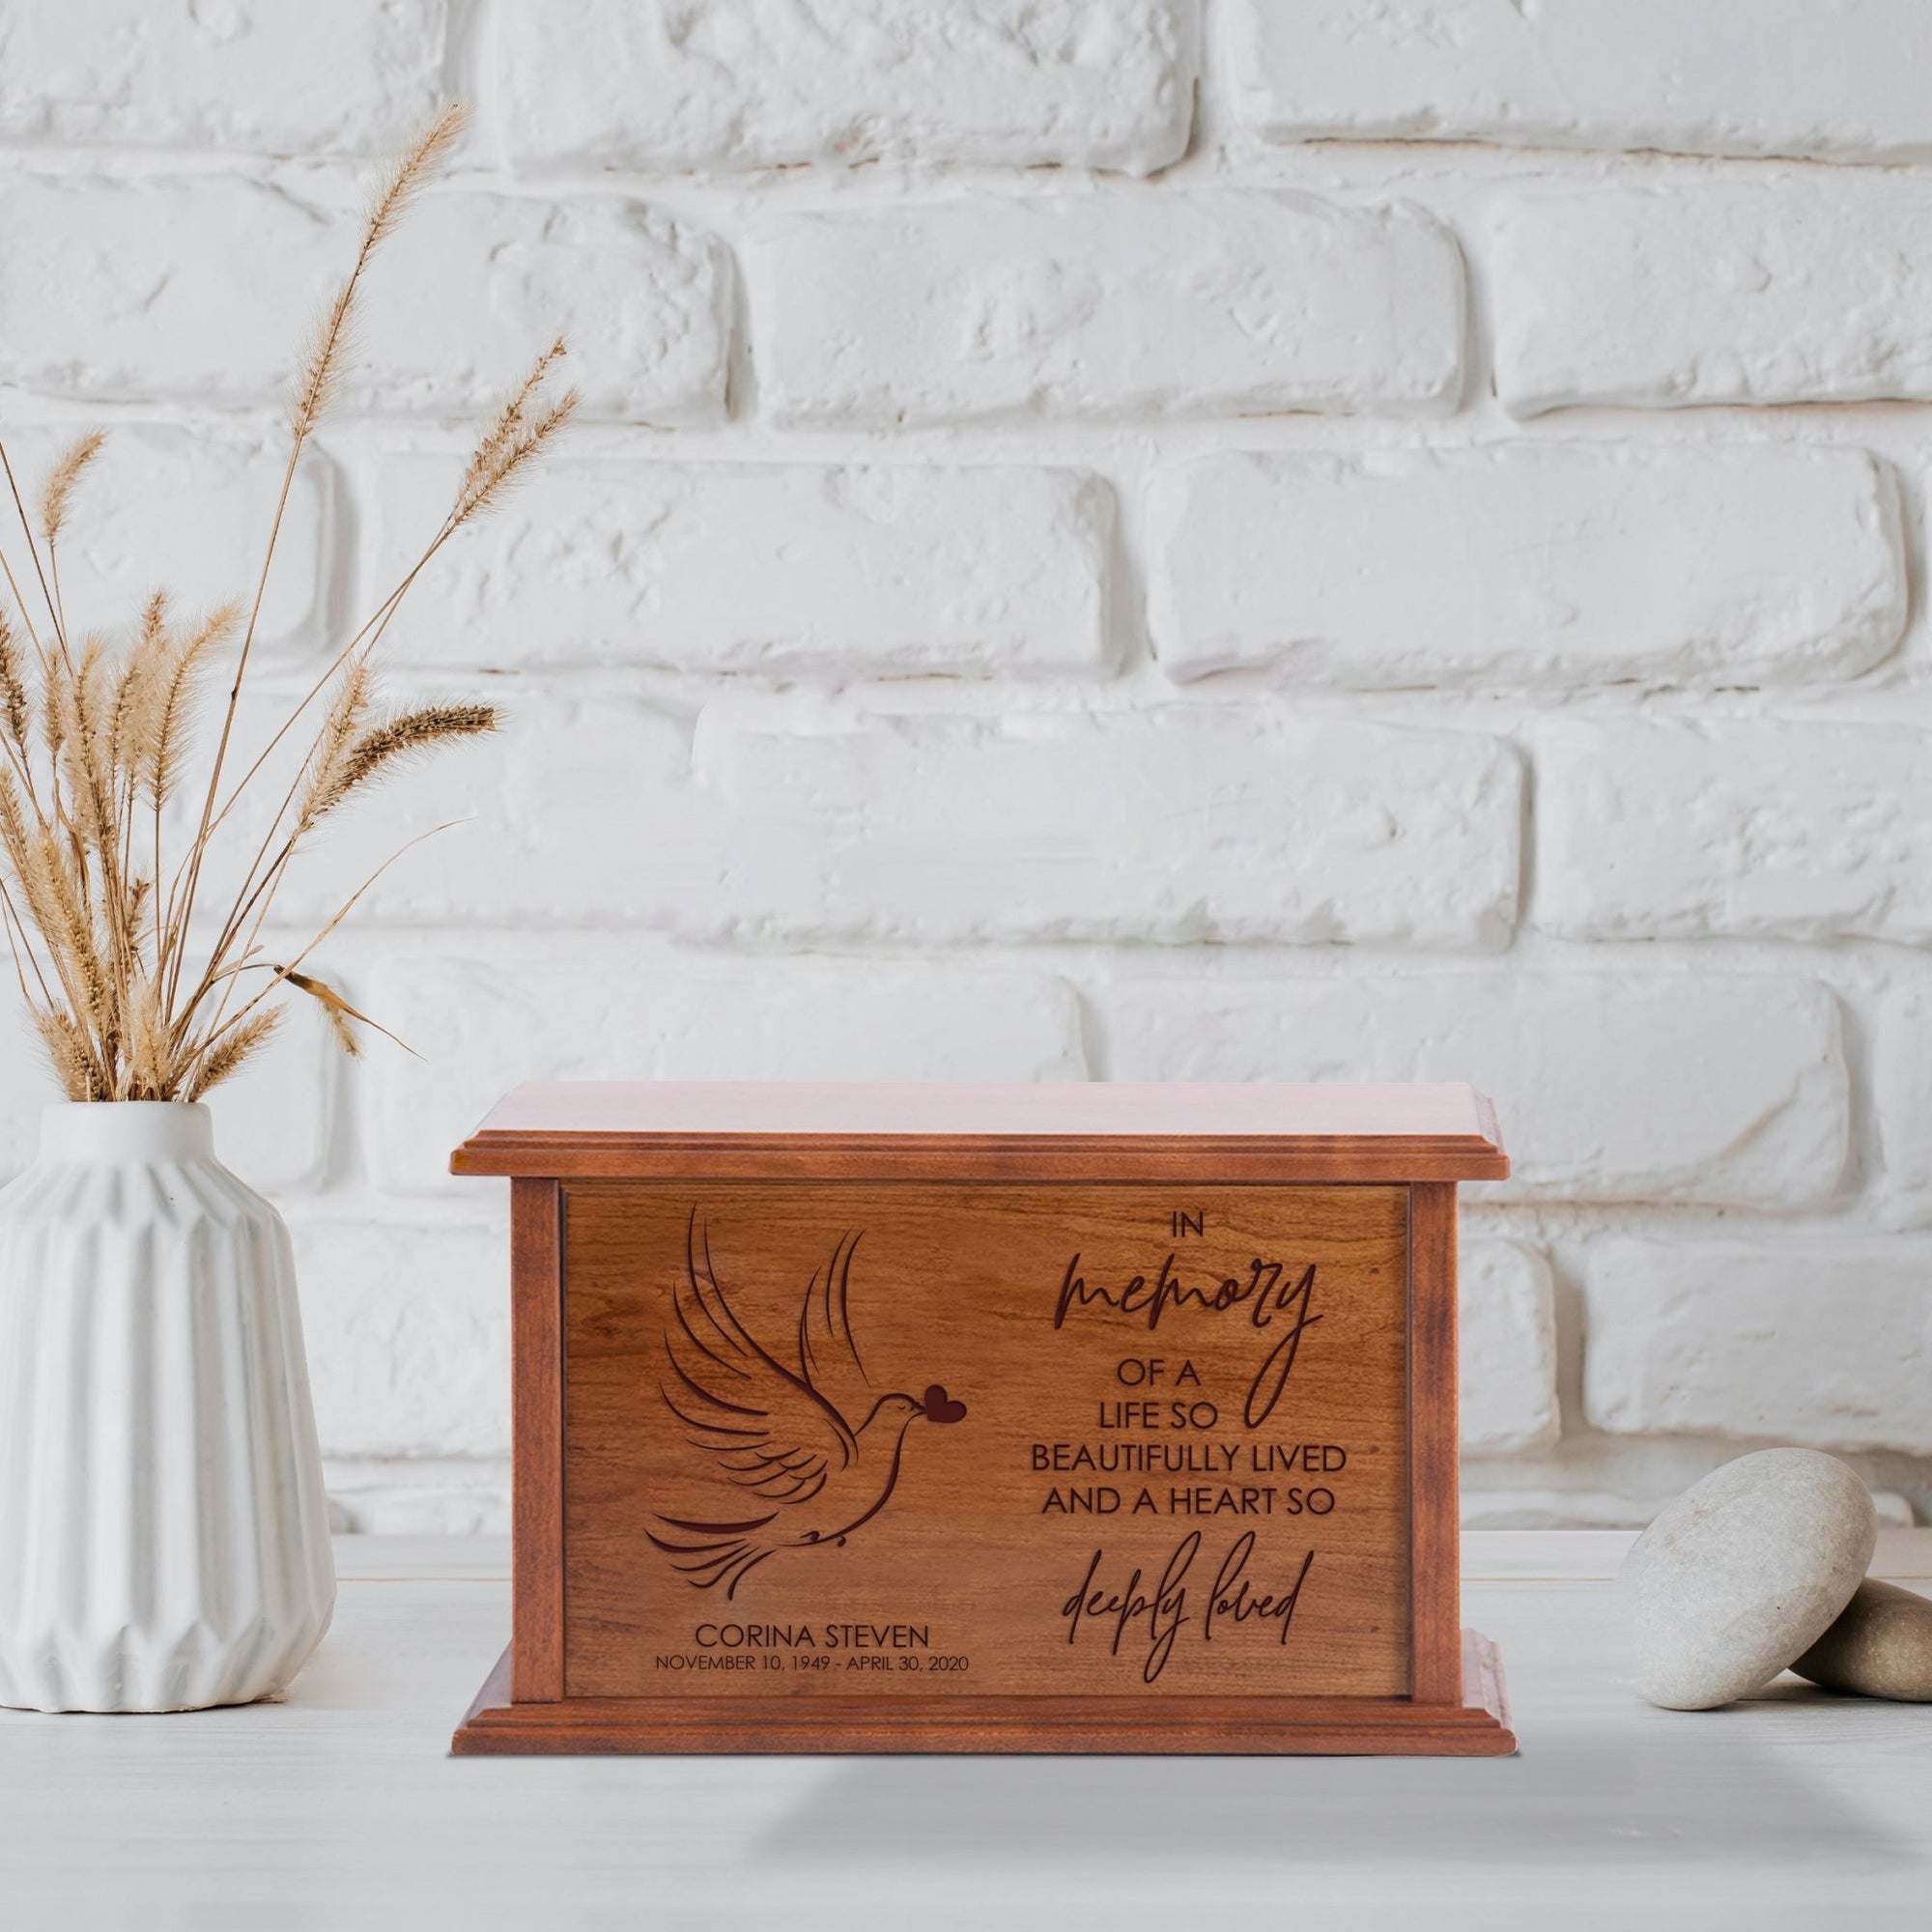 Custom Engraved Wooden Memorial Urns for Human Adult Ashes - In Memory Of A Life